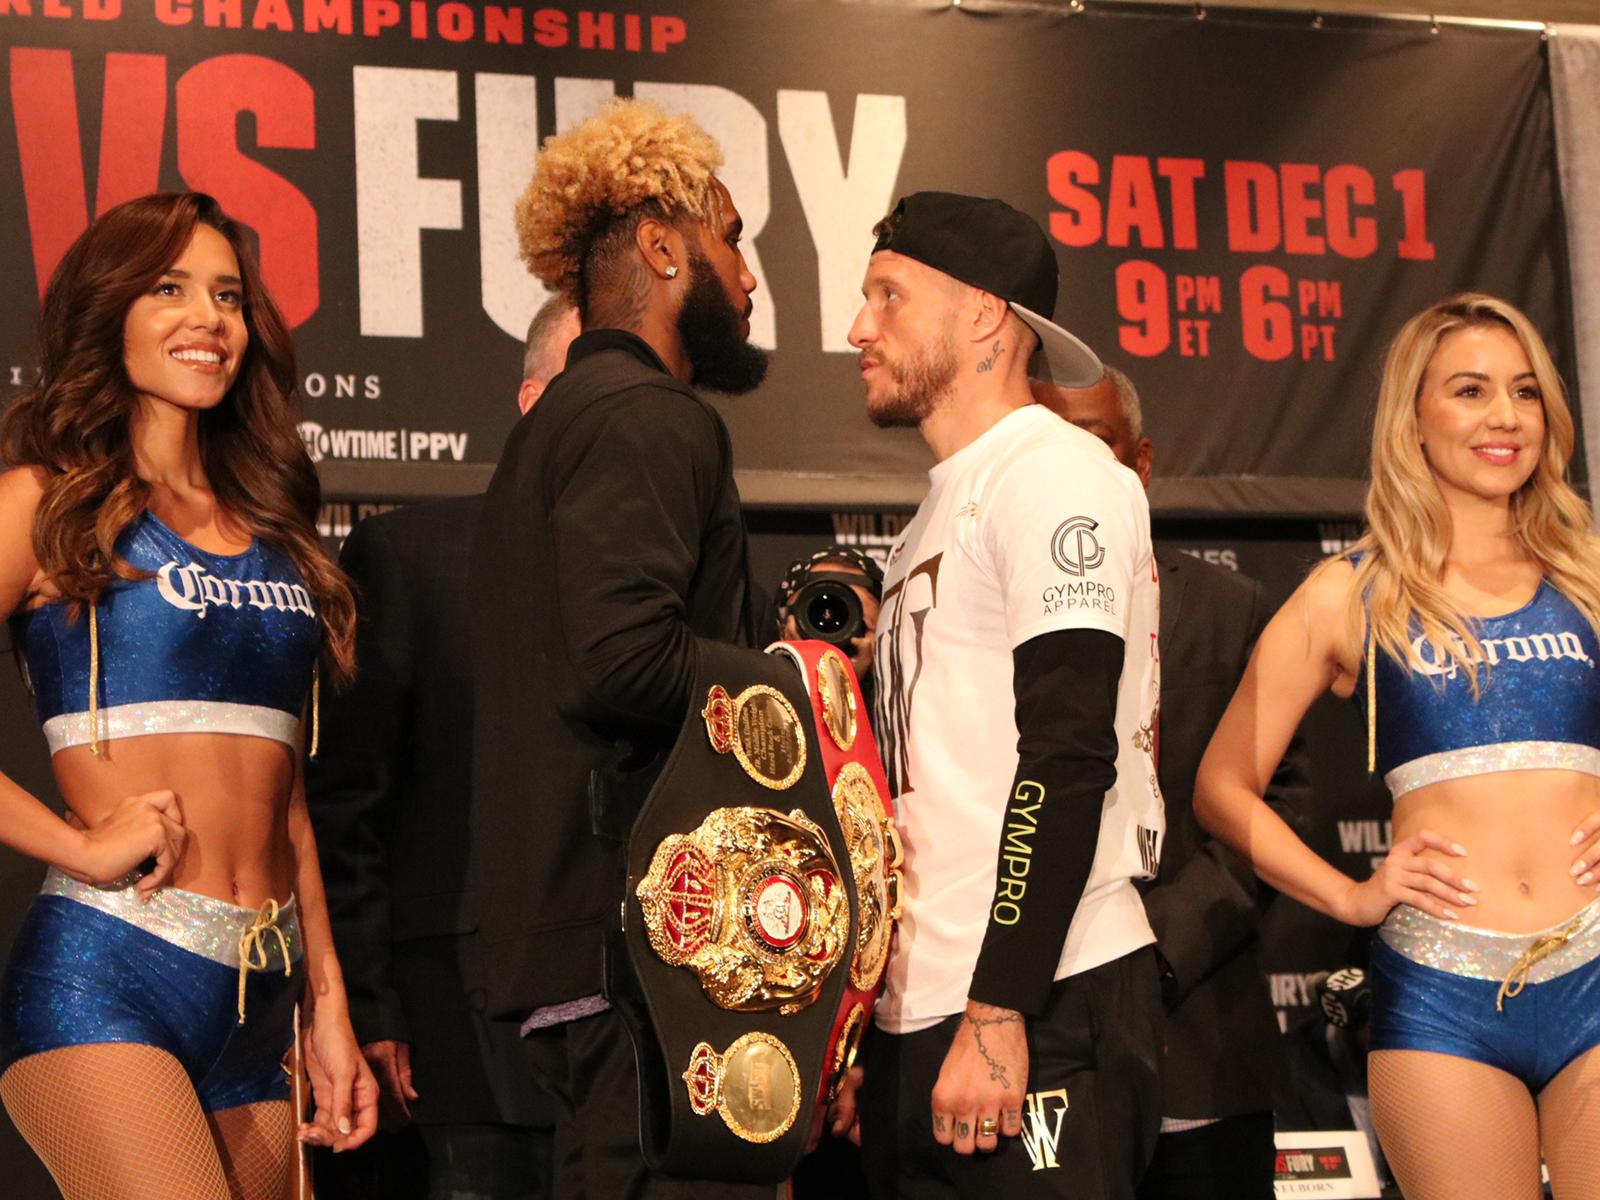 Hurd and Welborn promise explosive match Los Angeles